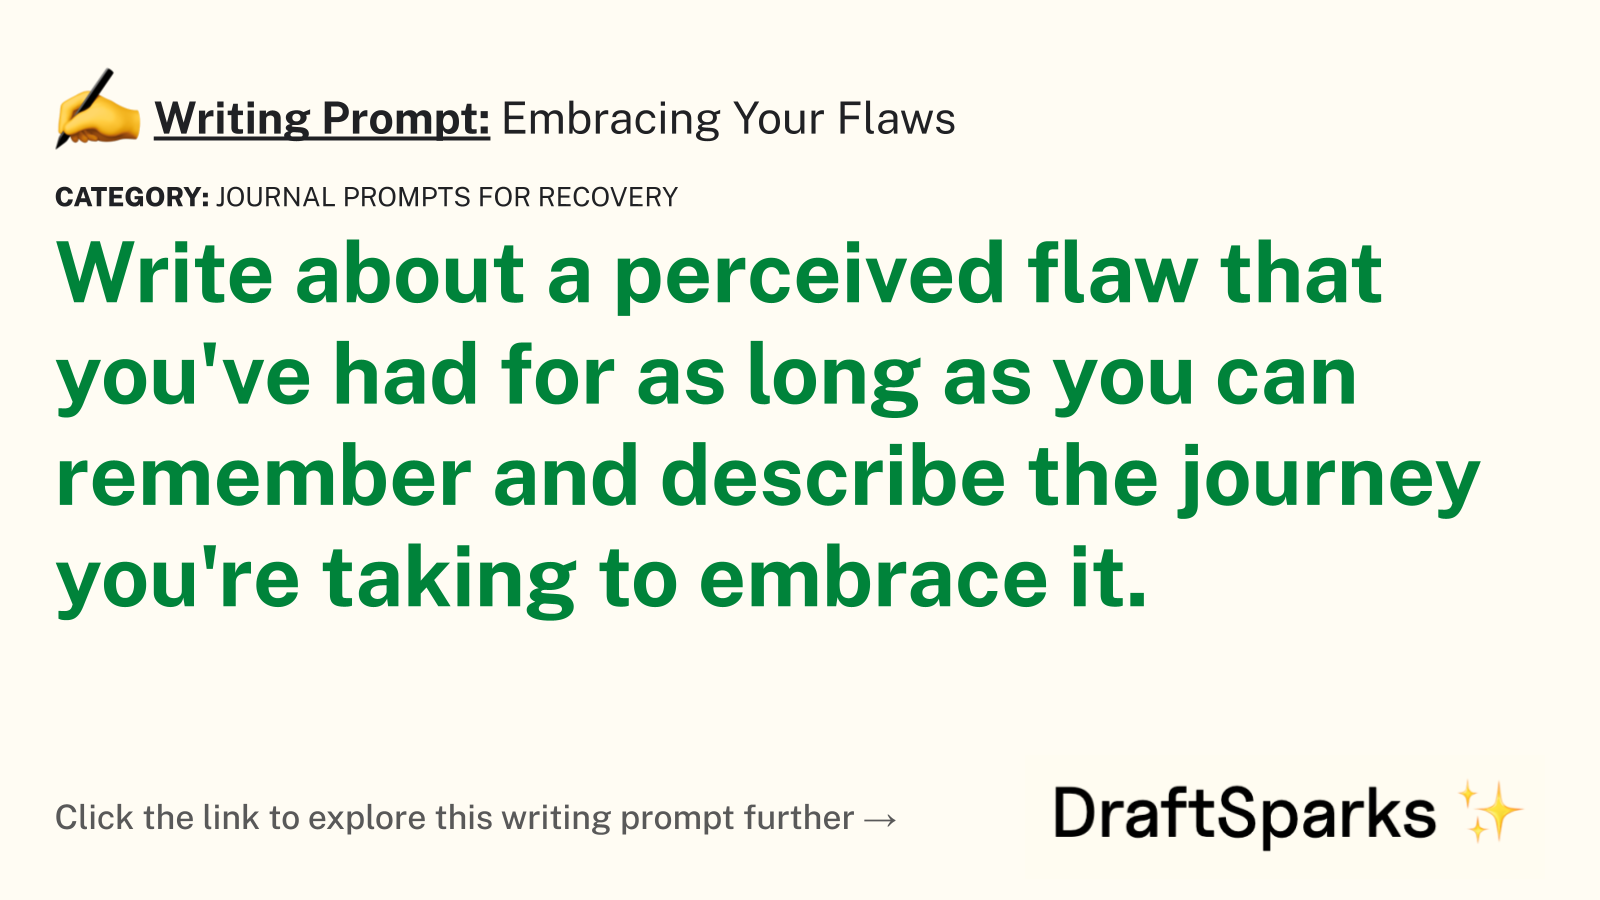 Embracing Your Flaws